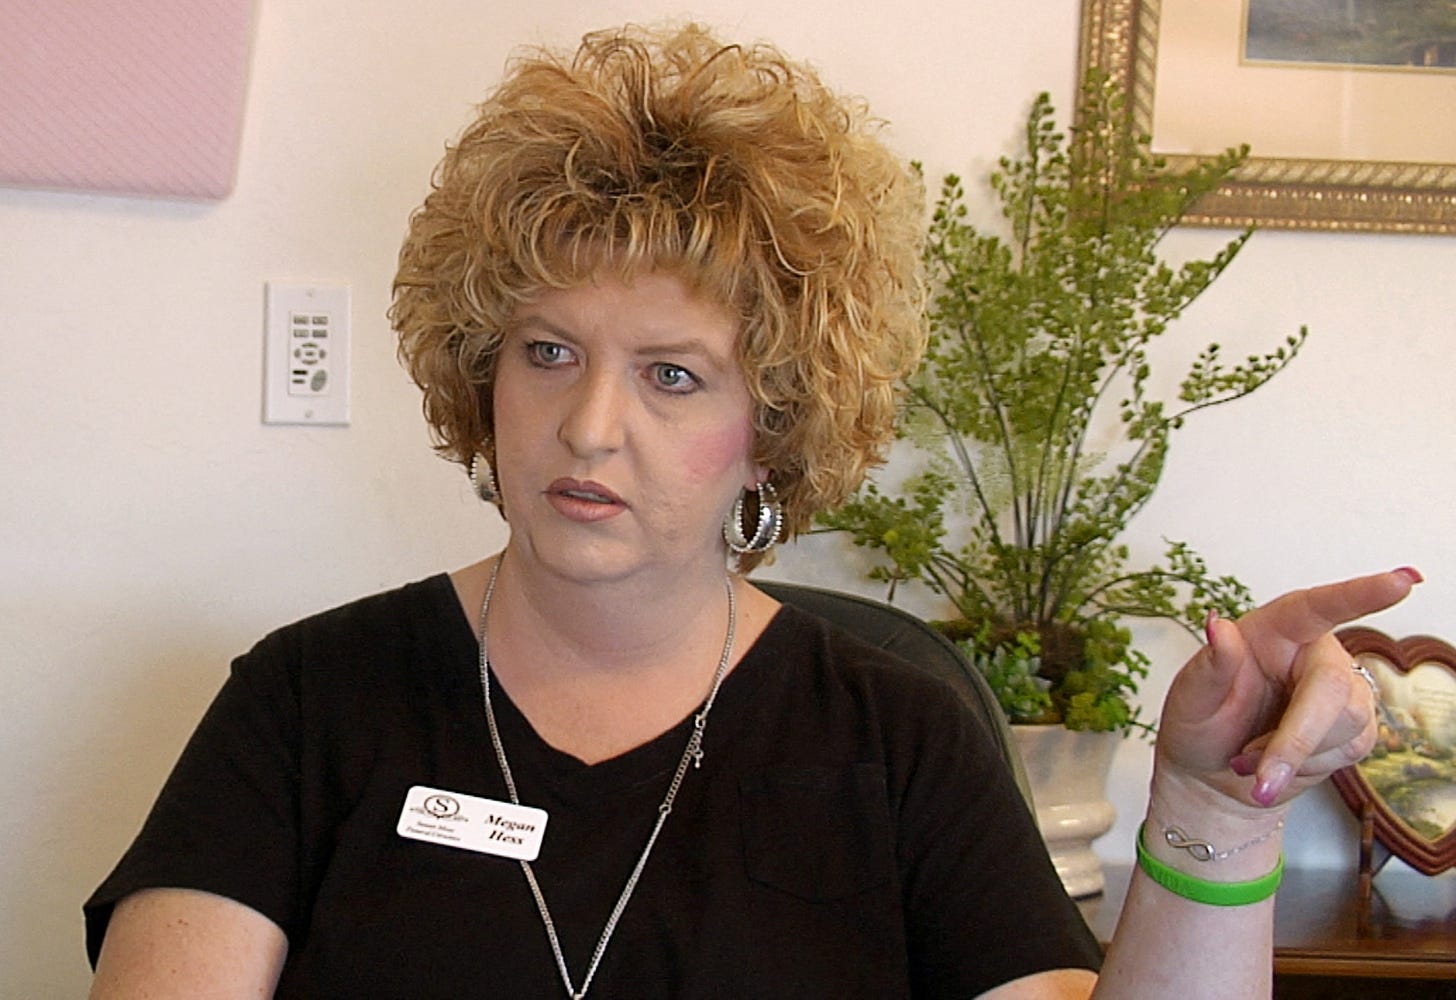 Megan Hess, owner of Donor Services, is pictured during an interview in Montrose